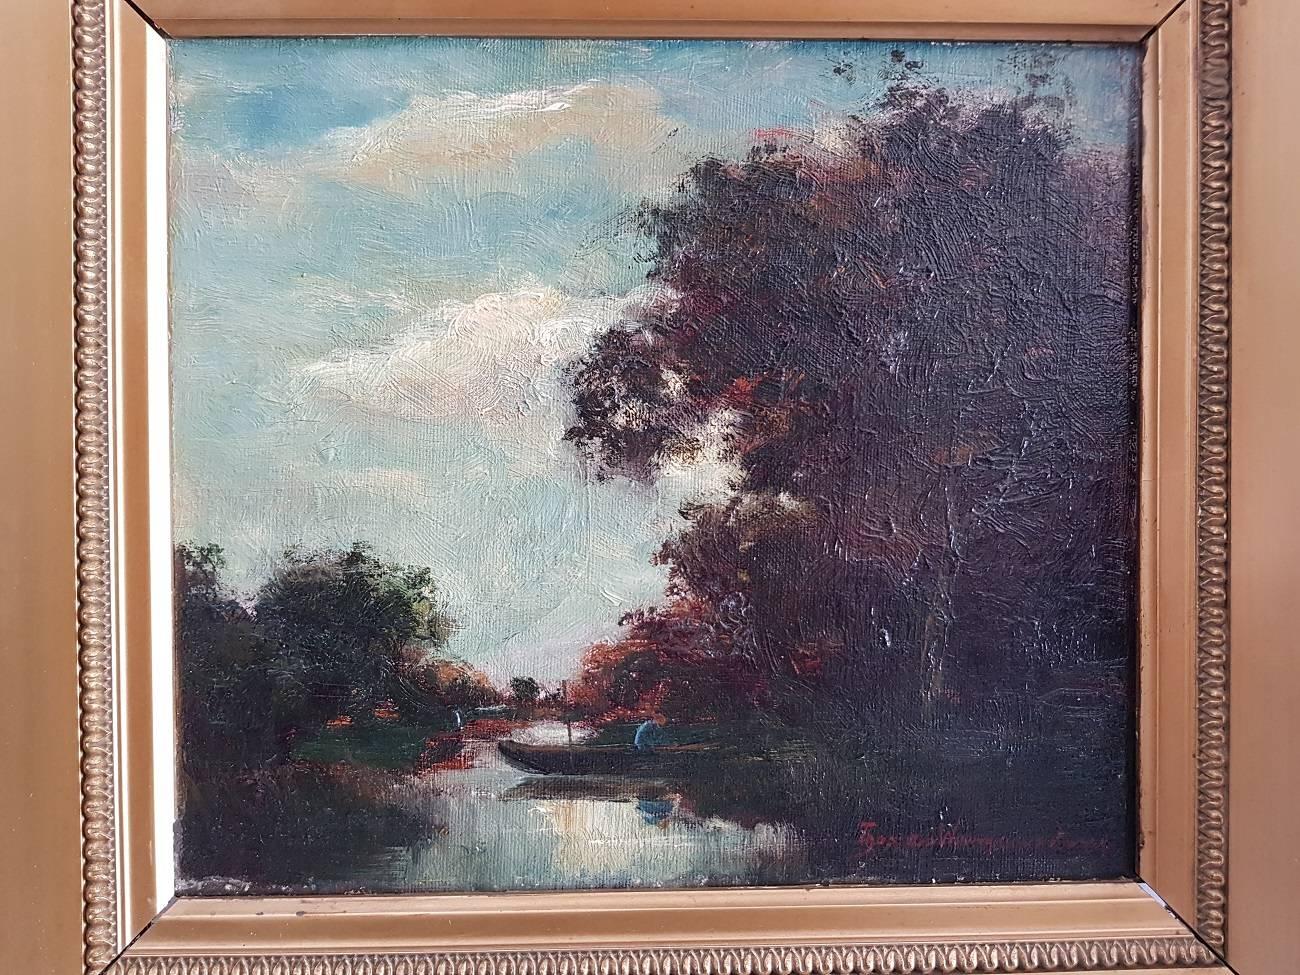 Impressionist work signed lower right by Theo van Wijngaarden (1874-1952) depicting “Fisherman in boat” marouflé. This artist became famous for his contacts with master forger Han van Meegeren.

The measurements are including frame,
Depth 6 cm/